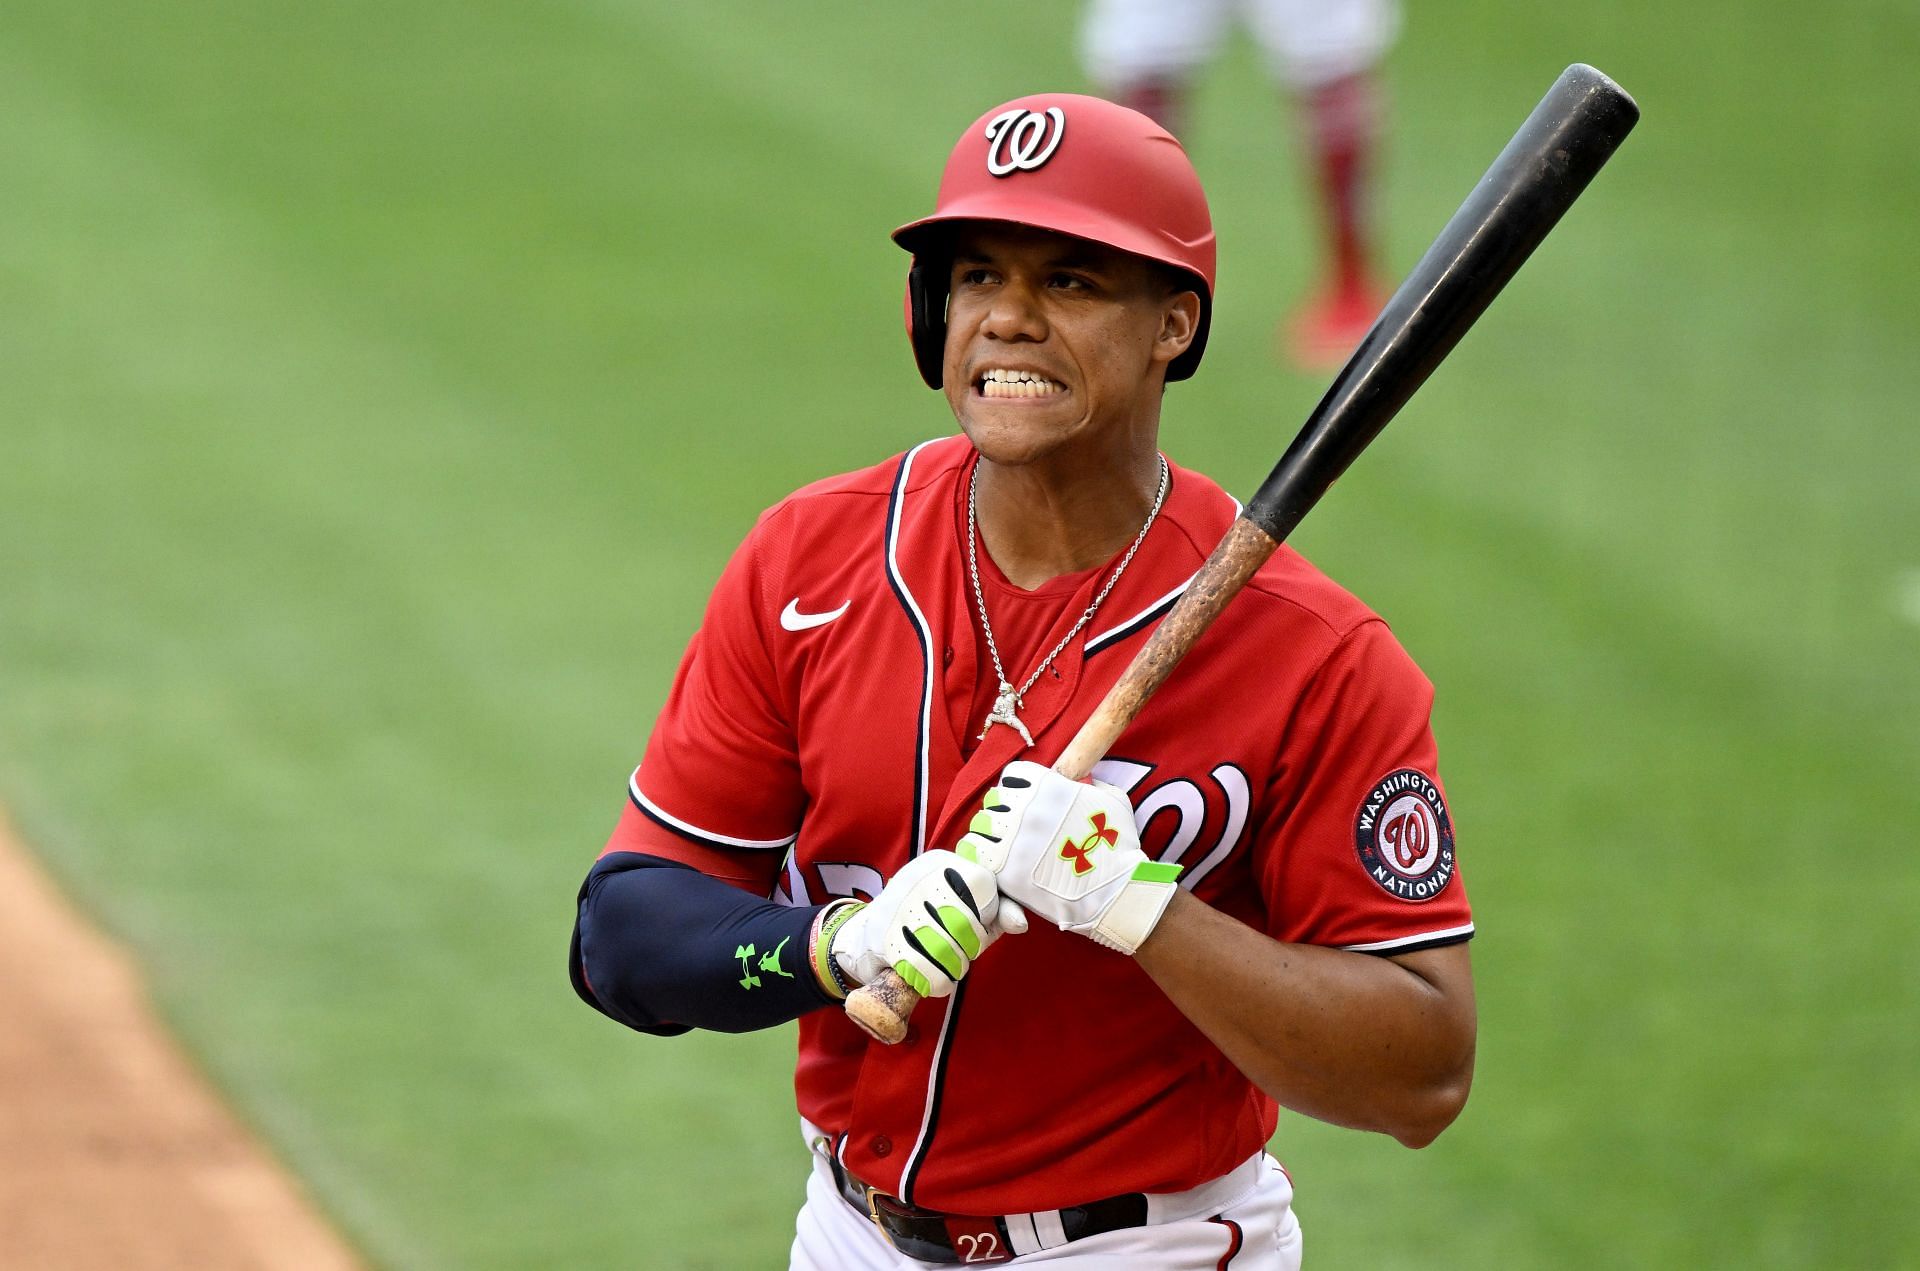 Outfielder Juan Soto struggling massively after trade to Padres